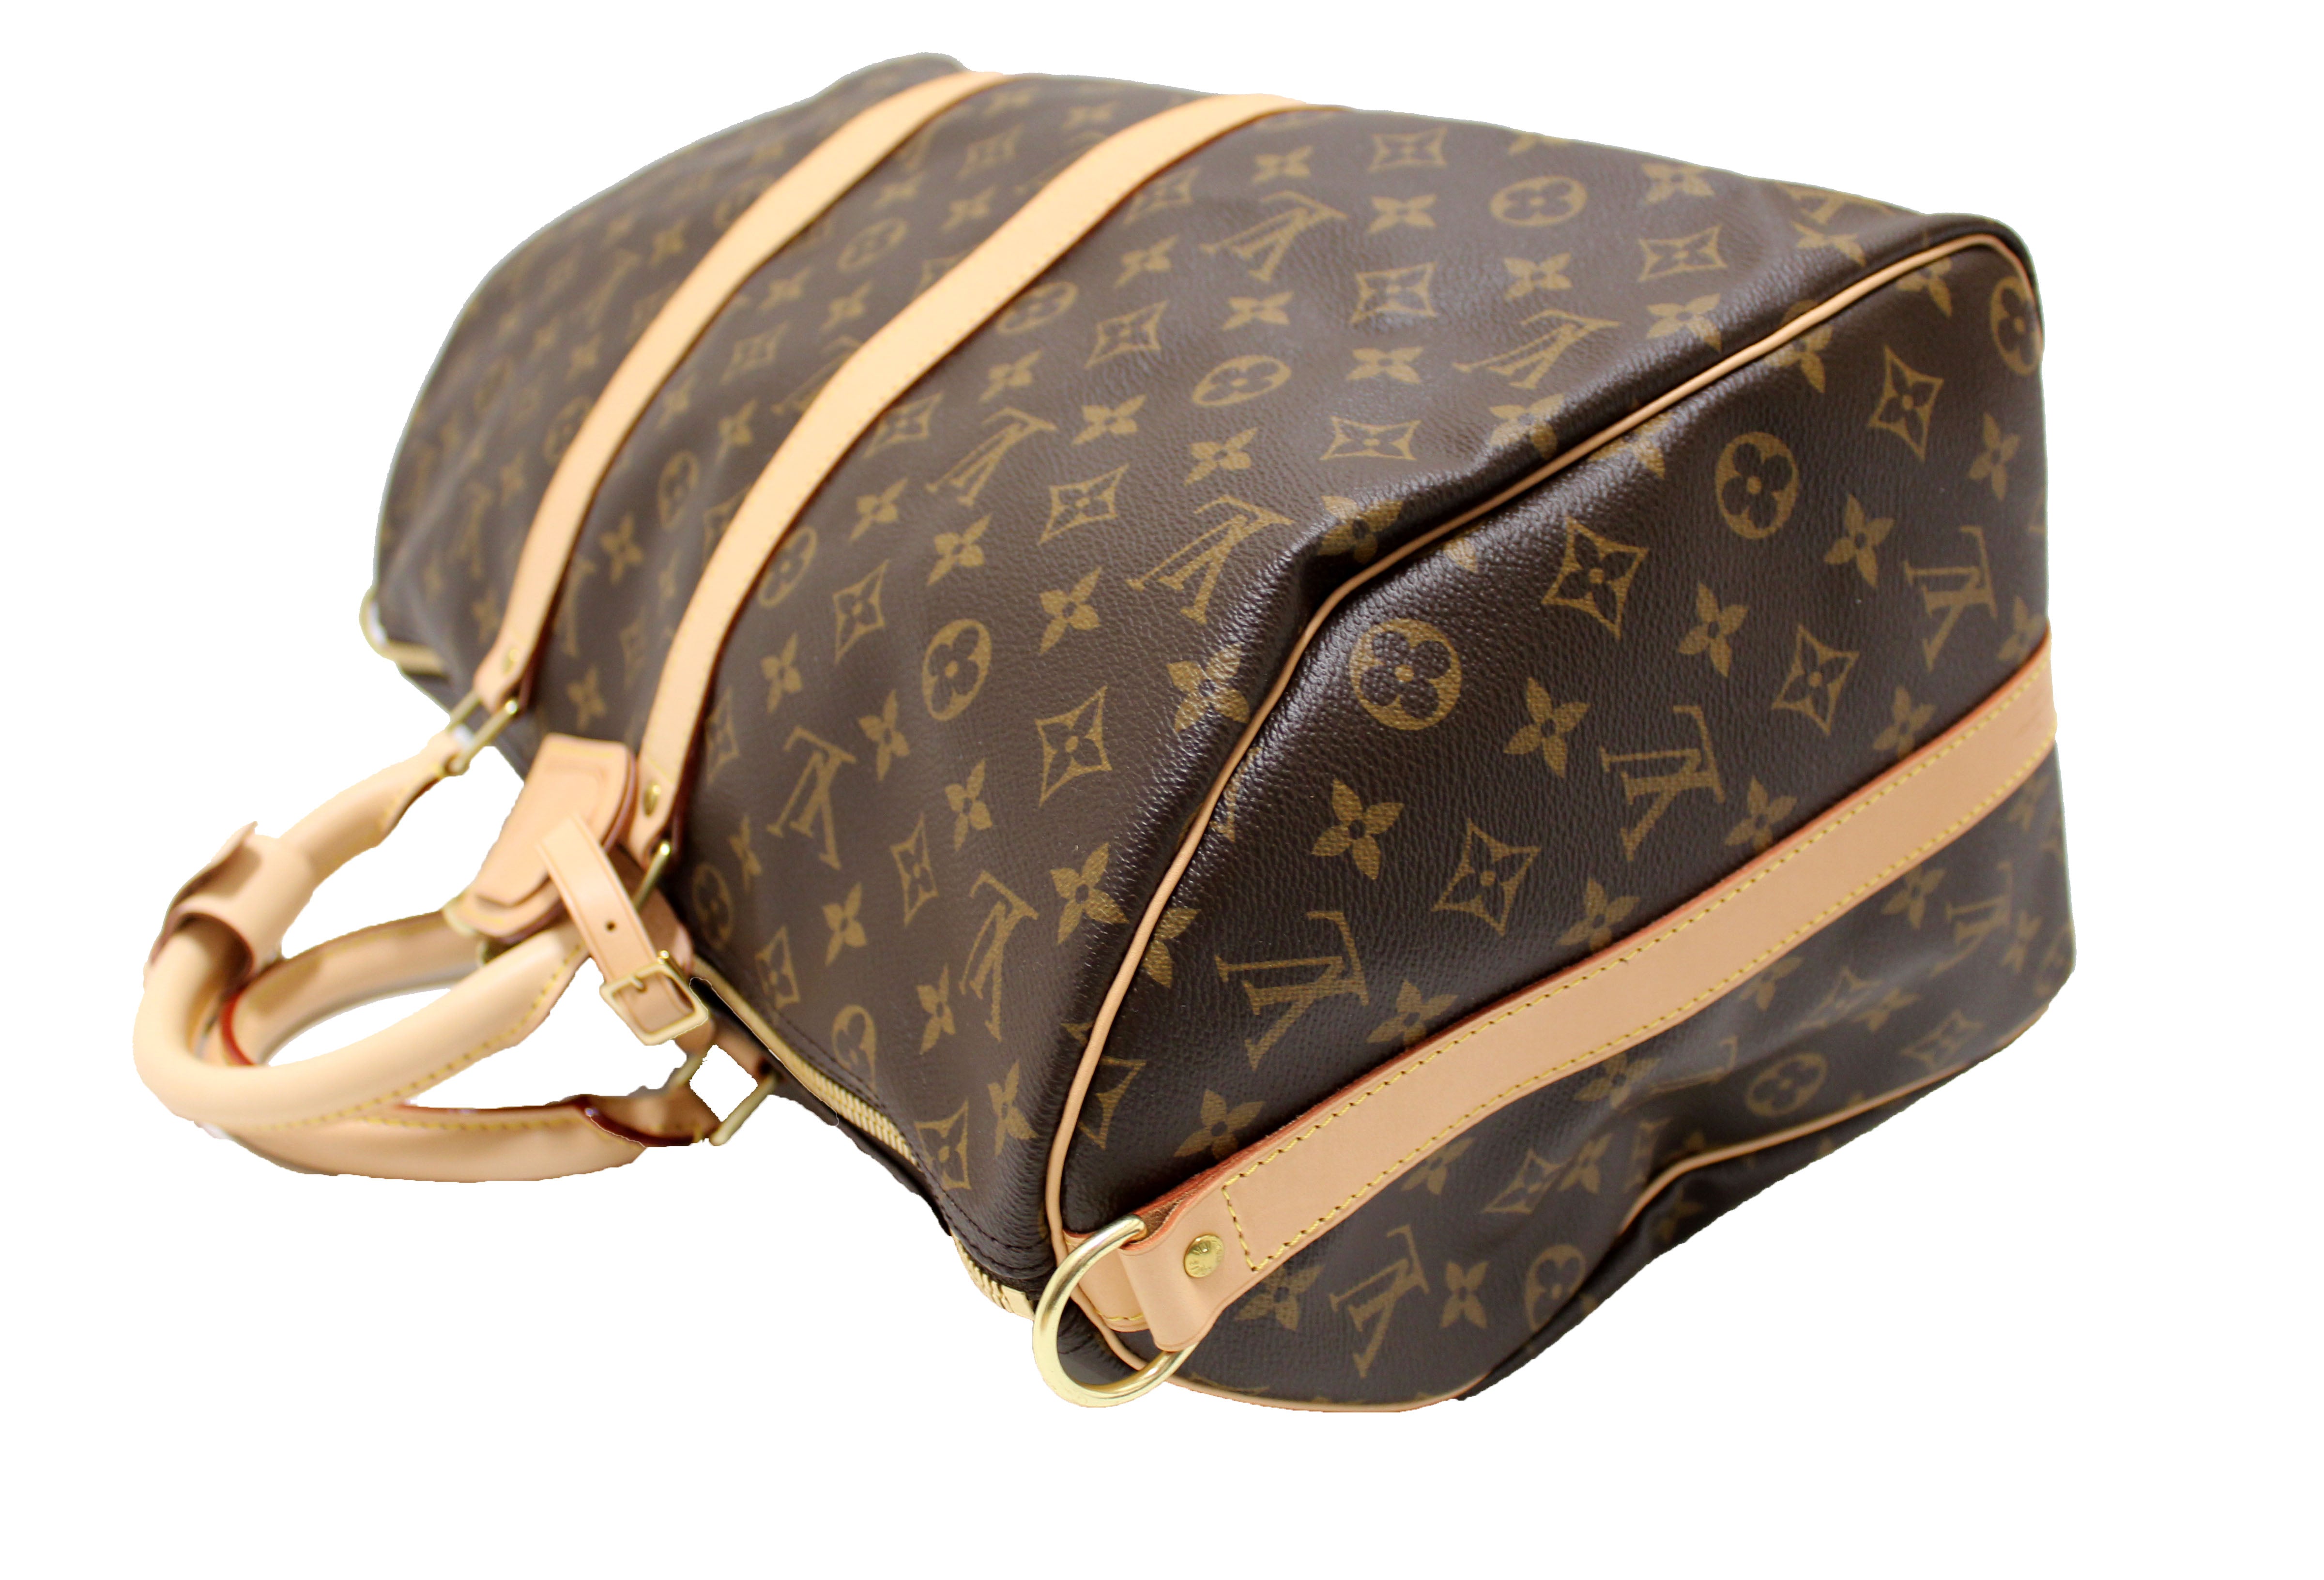 Authentic NEW Louis Vuitton Classic Monogram Keepall Bandouliere 45 Travel Bag